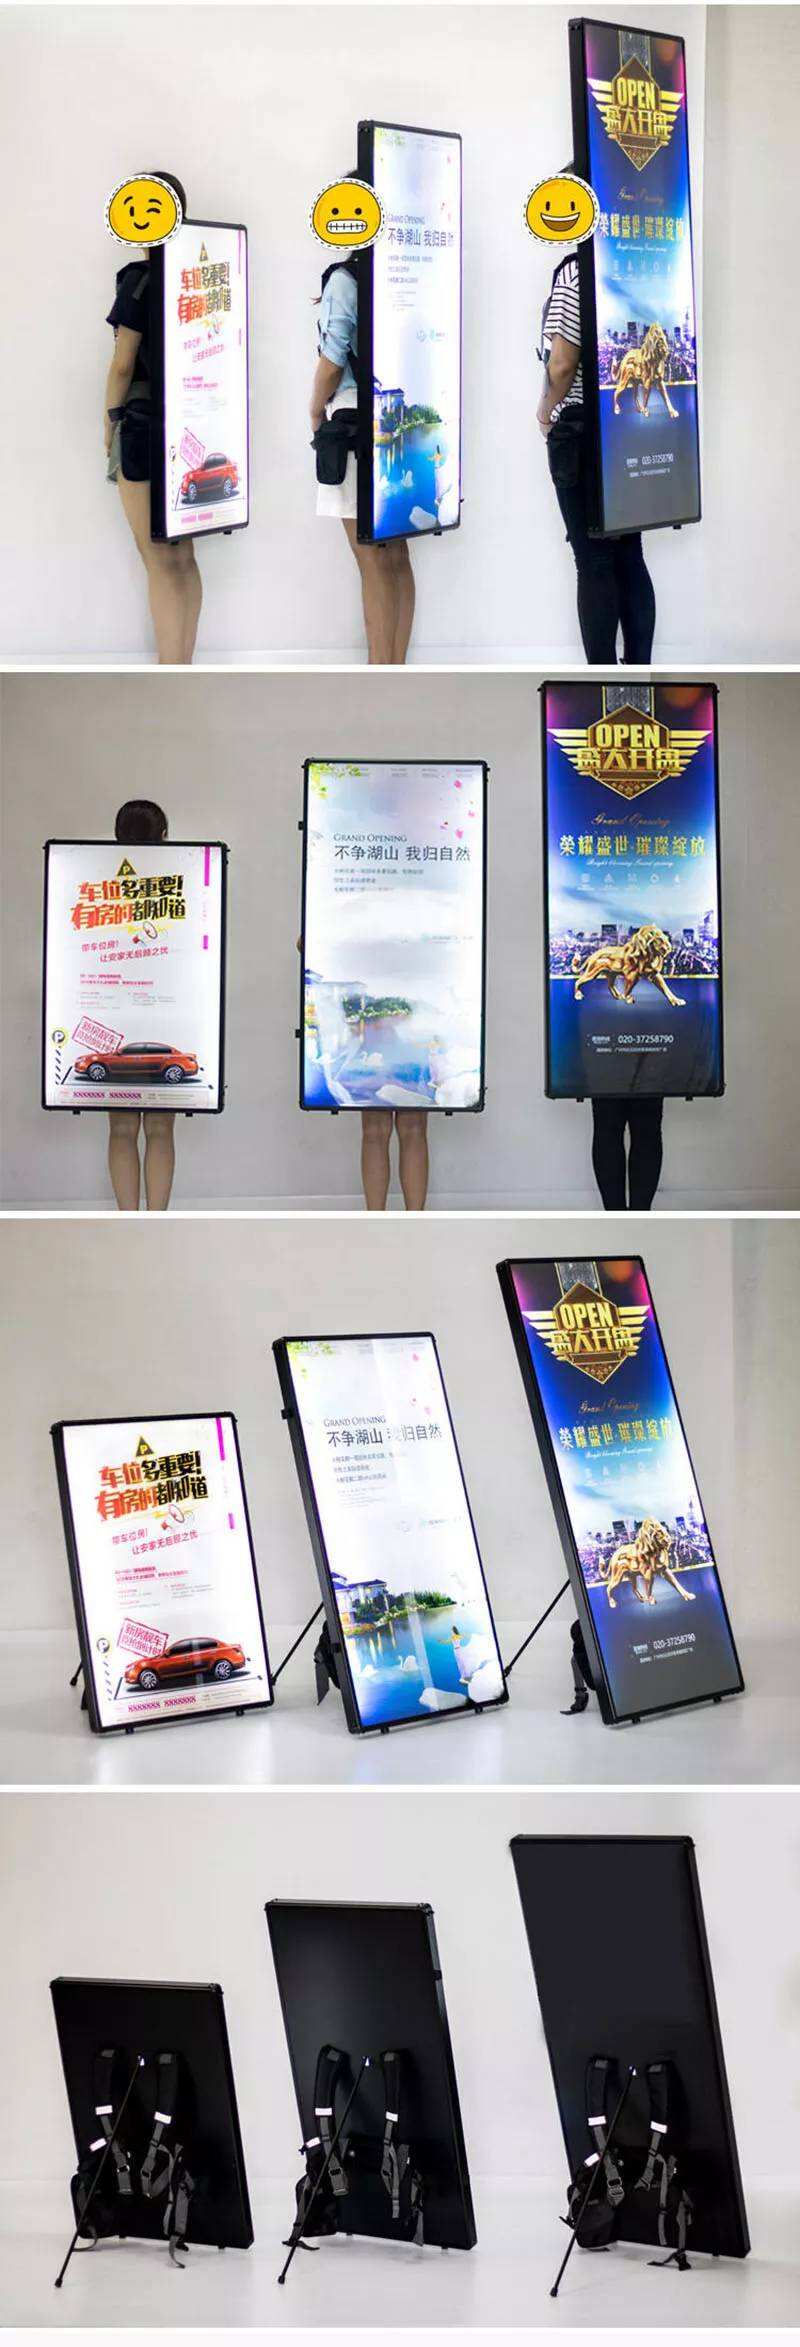 High quality LED backpack light box with battery portable walking billboard manufacture